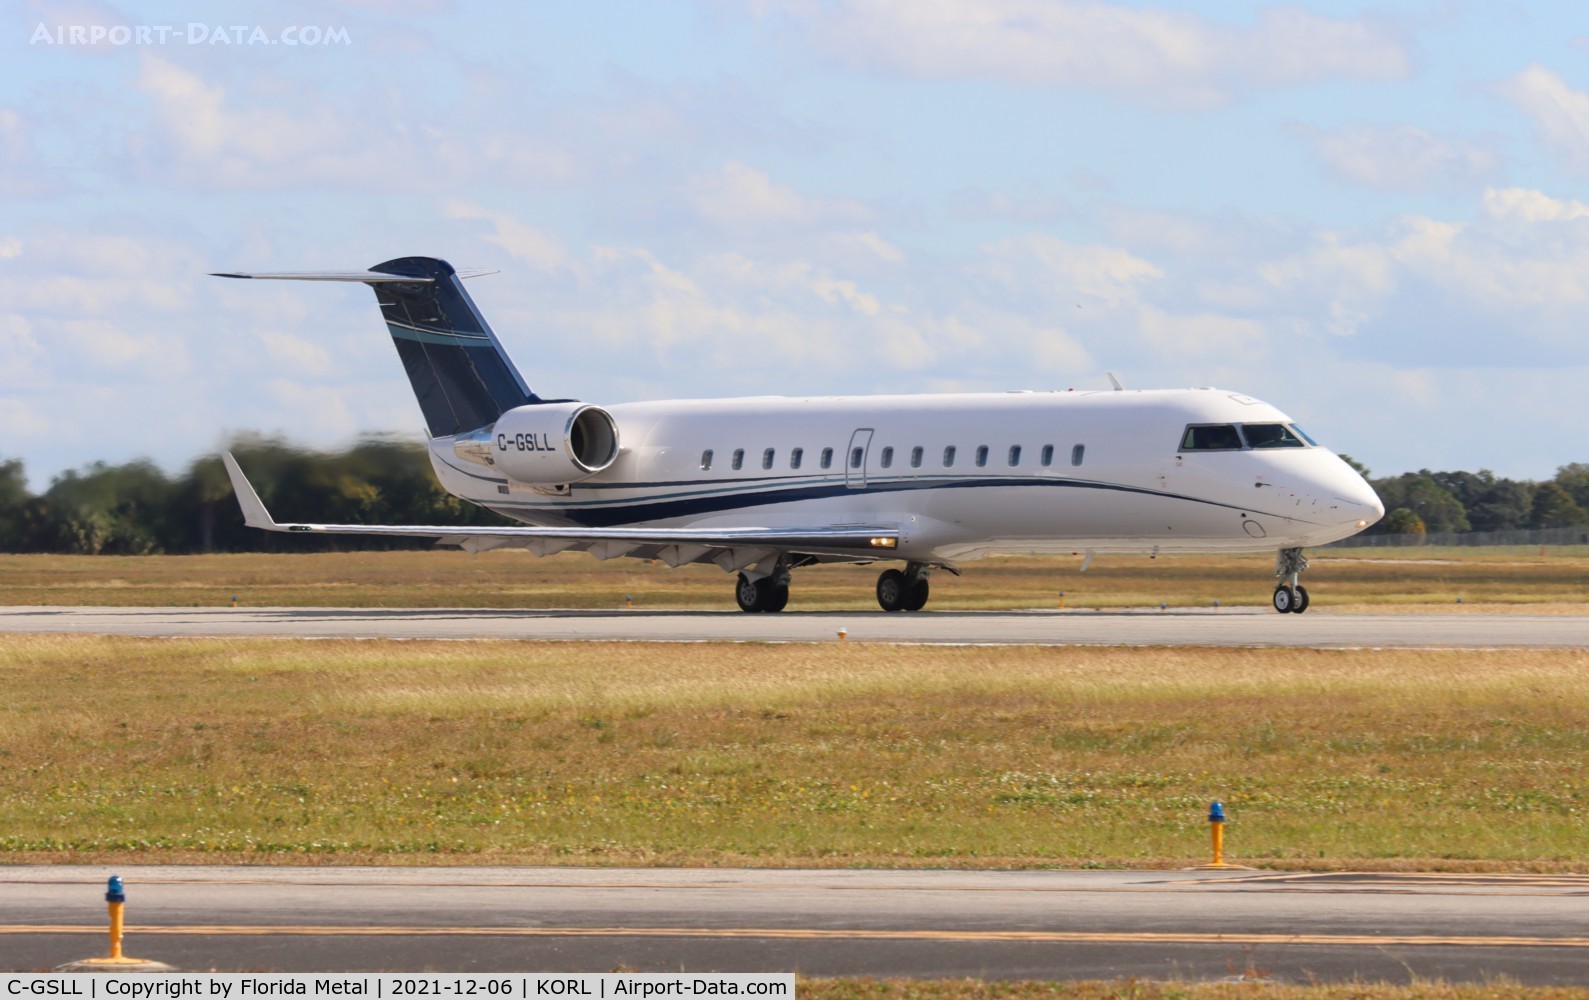 C-GSLL, 2009 Bombardier Challenger 850 (CL-600-2B19) C/N 8103, Challenger 850 zx